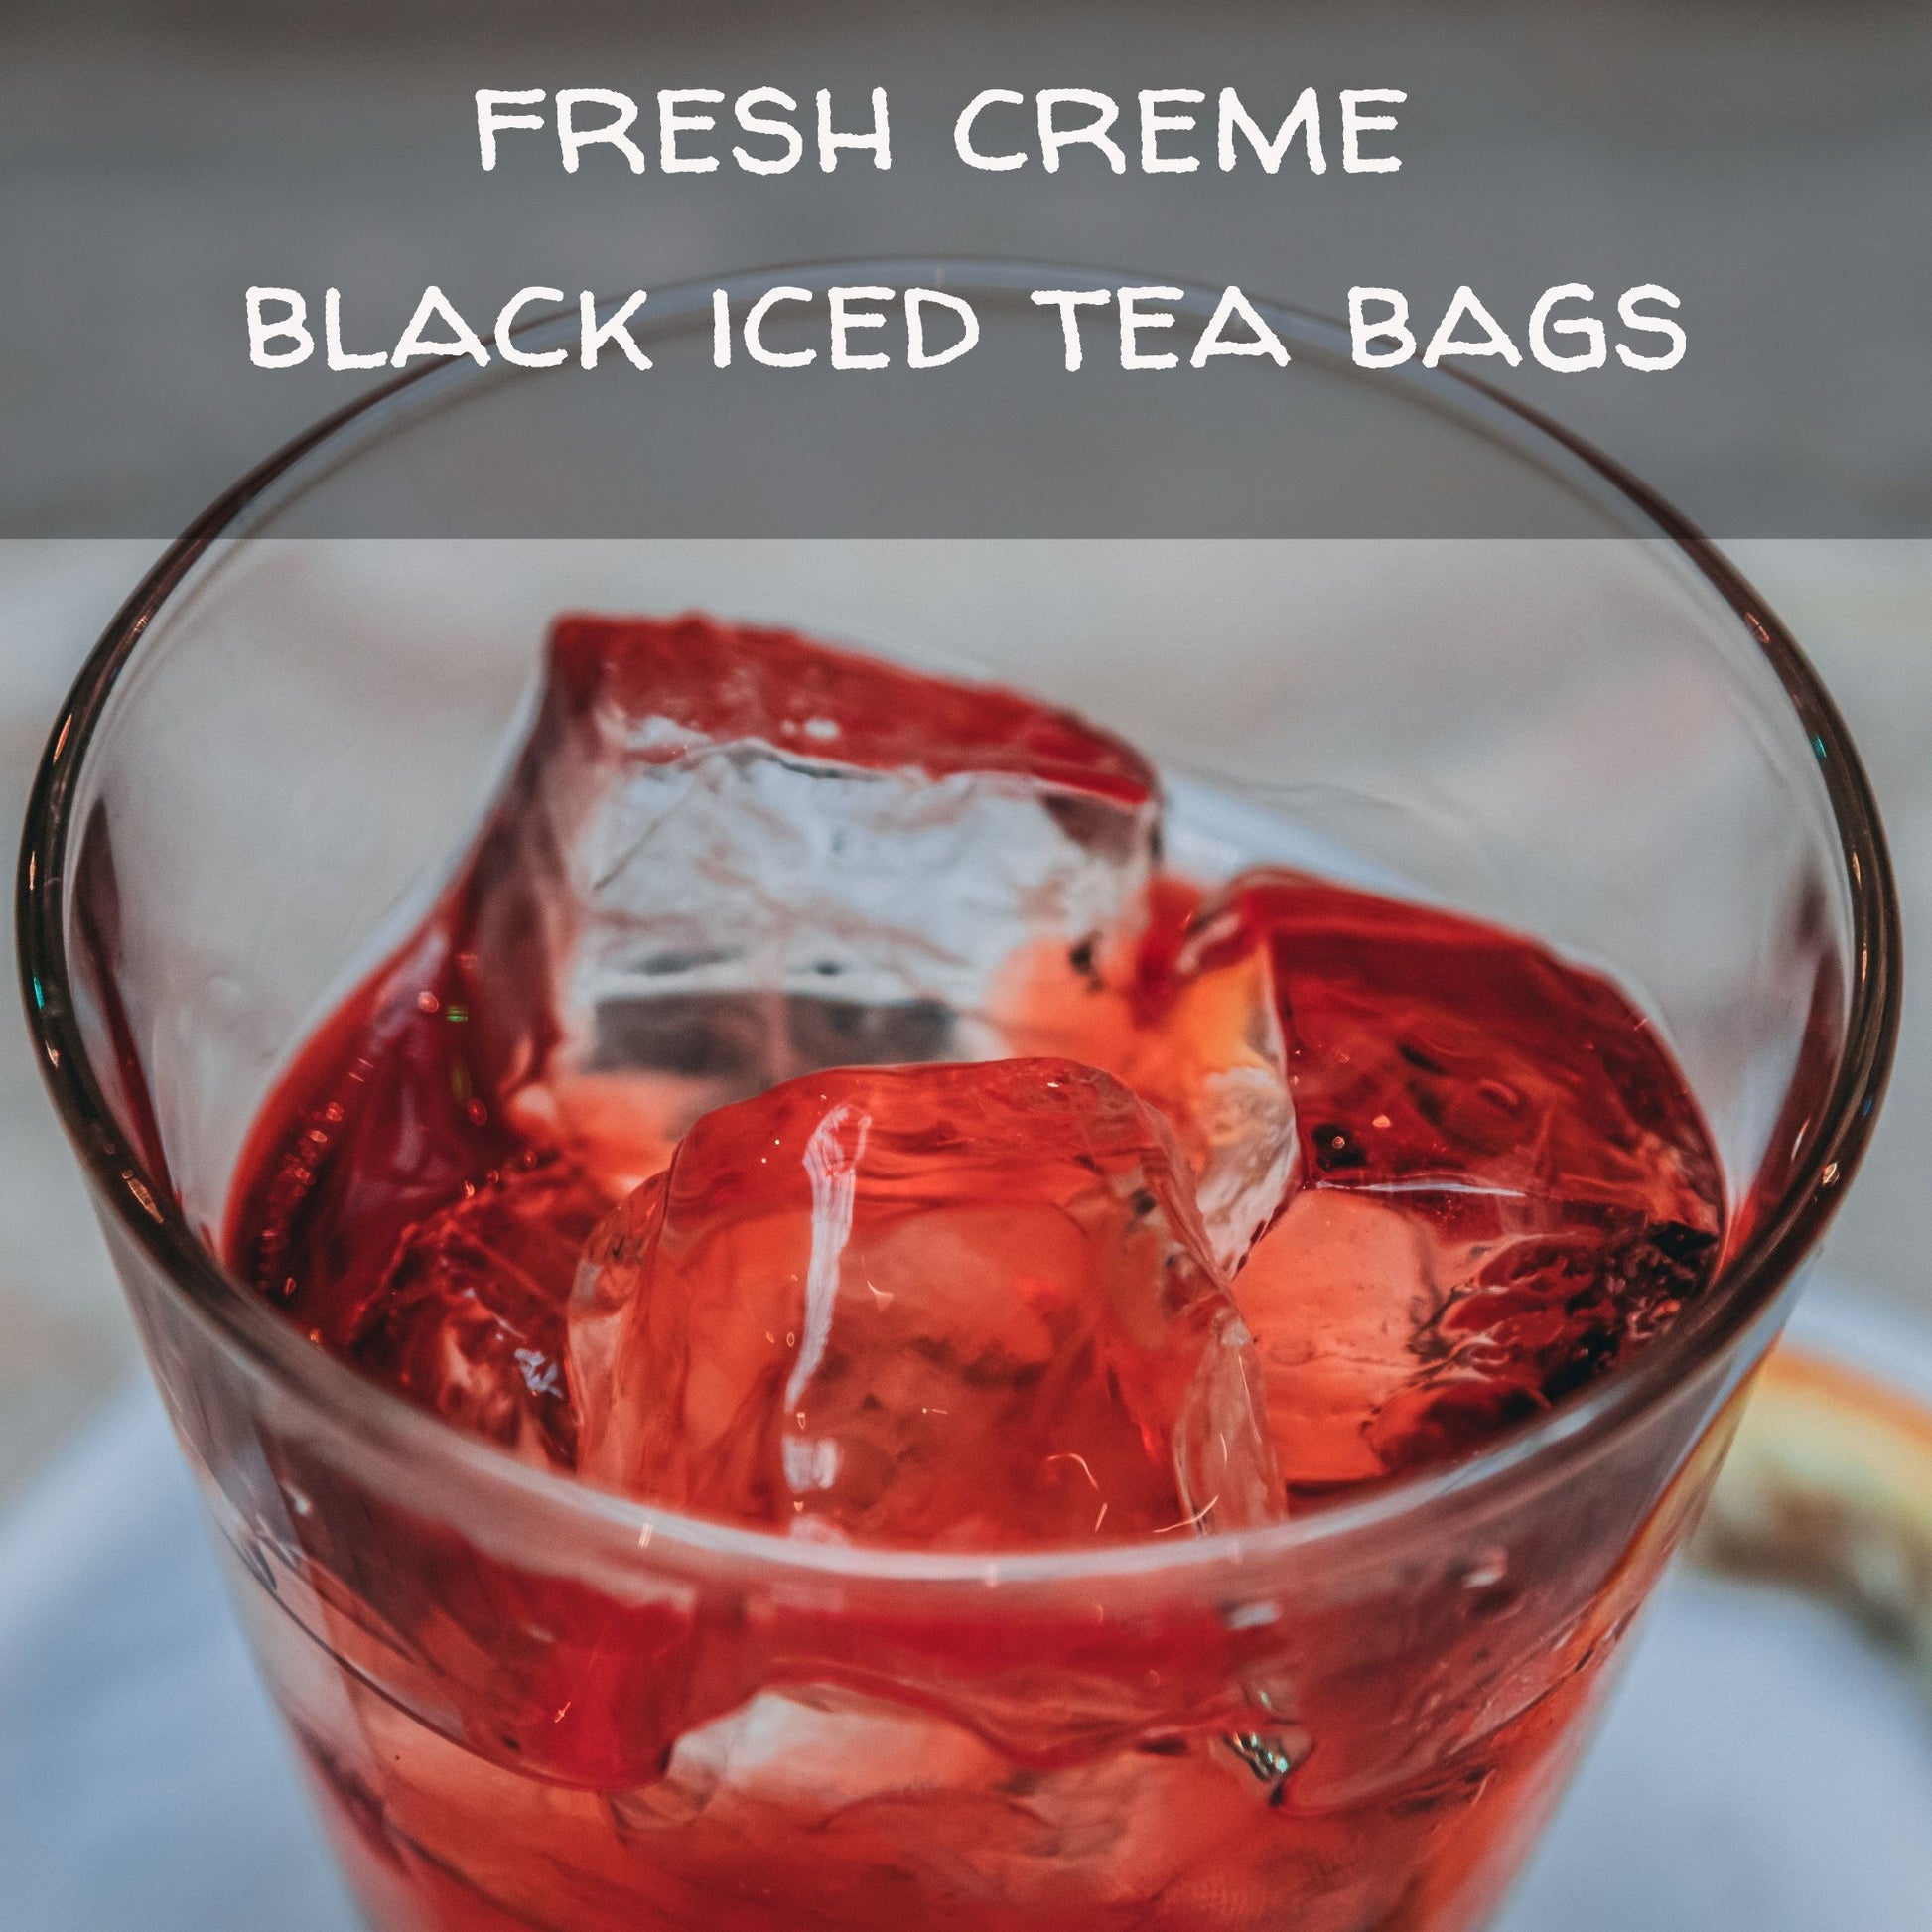 Fresh Creme Black Iced Tea Bags, available in quantities of 1, 6 or 12 quart size pouches Iced Tea The Grateful Tea Co. 